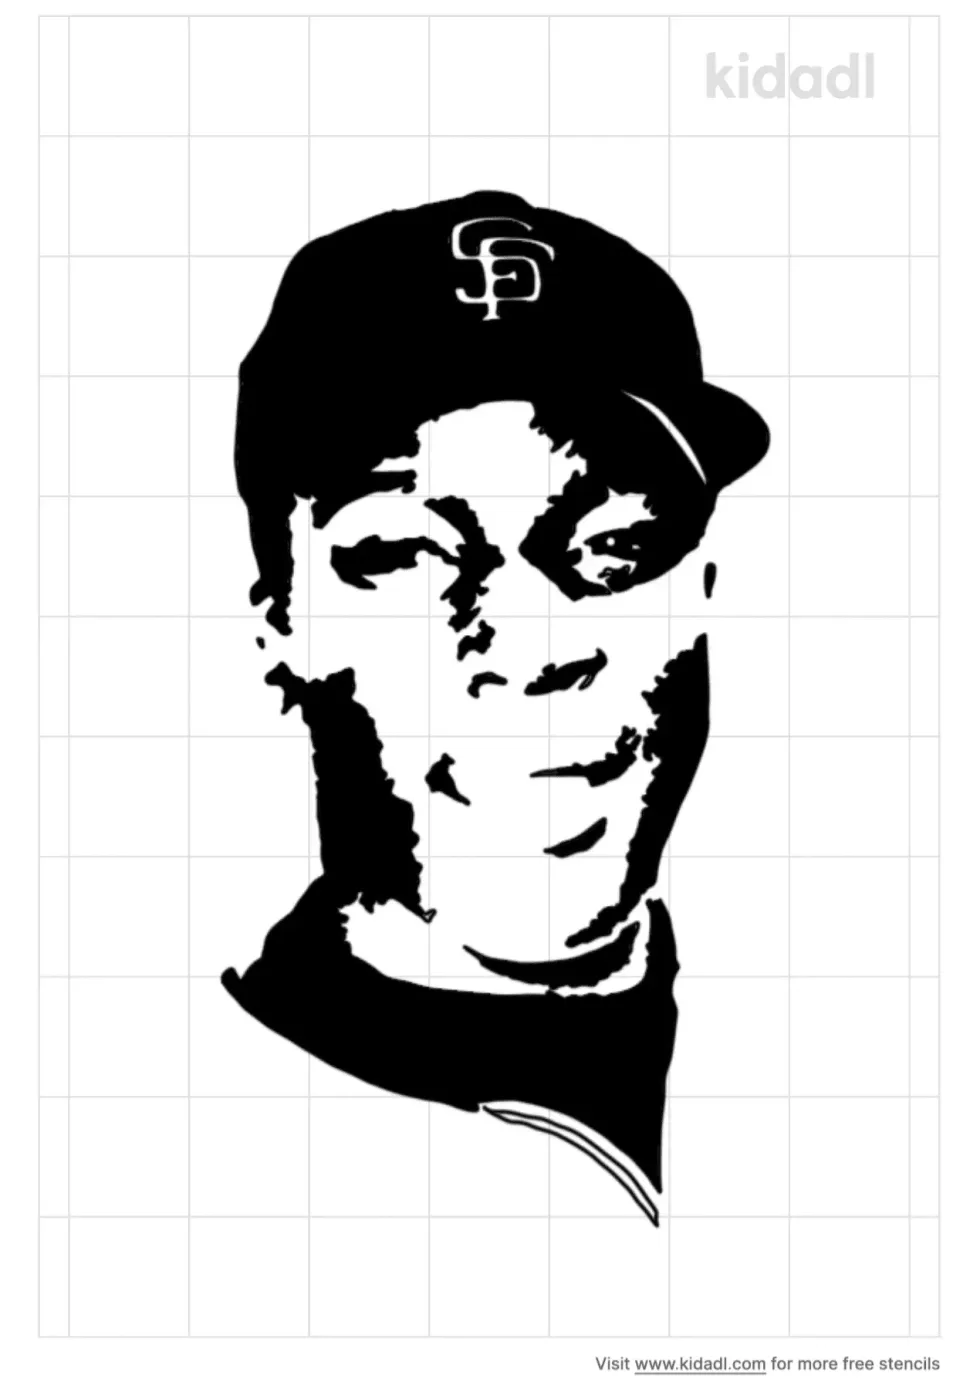 Willie Mccovey